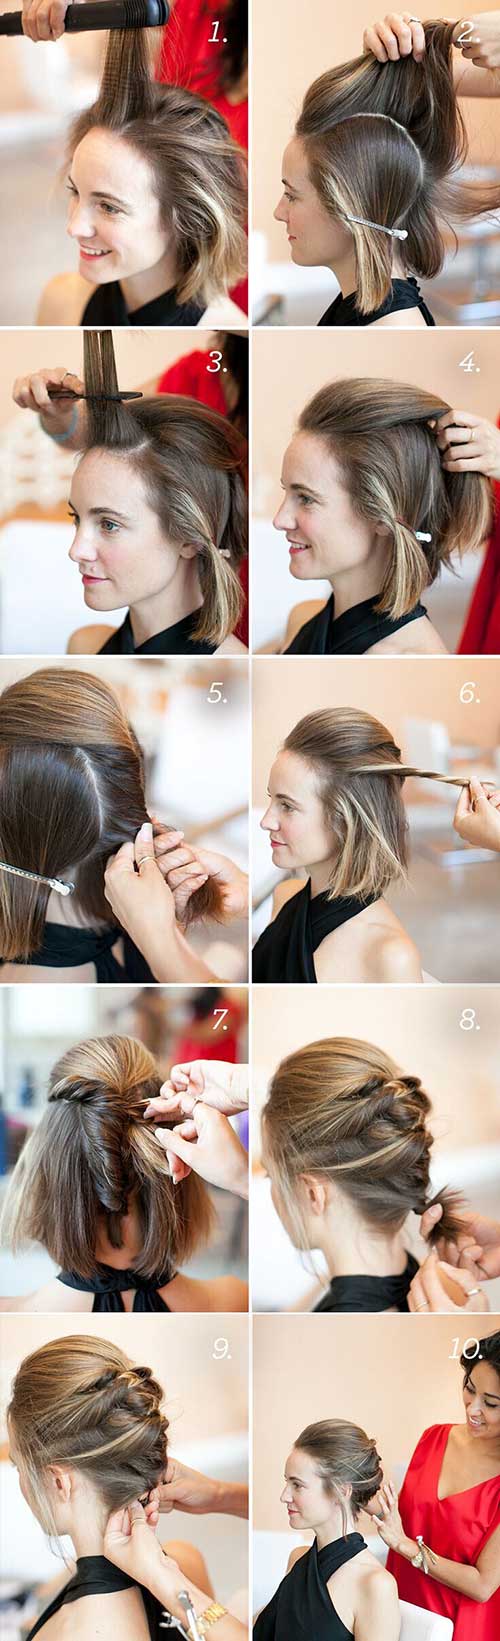 20 incredible diy short hairstyles - a step-by-step guide